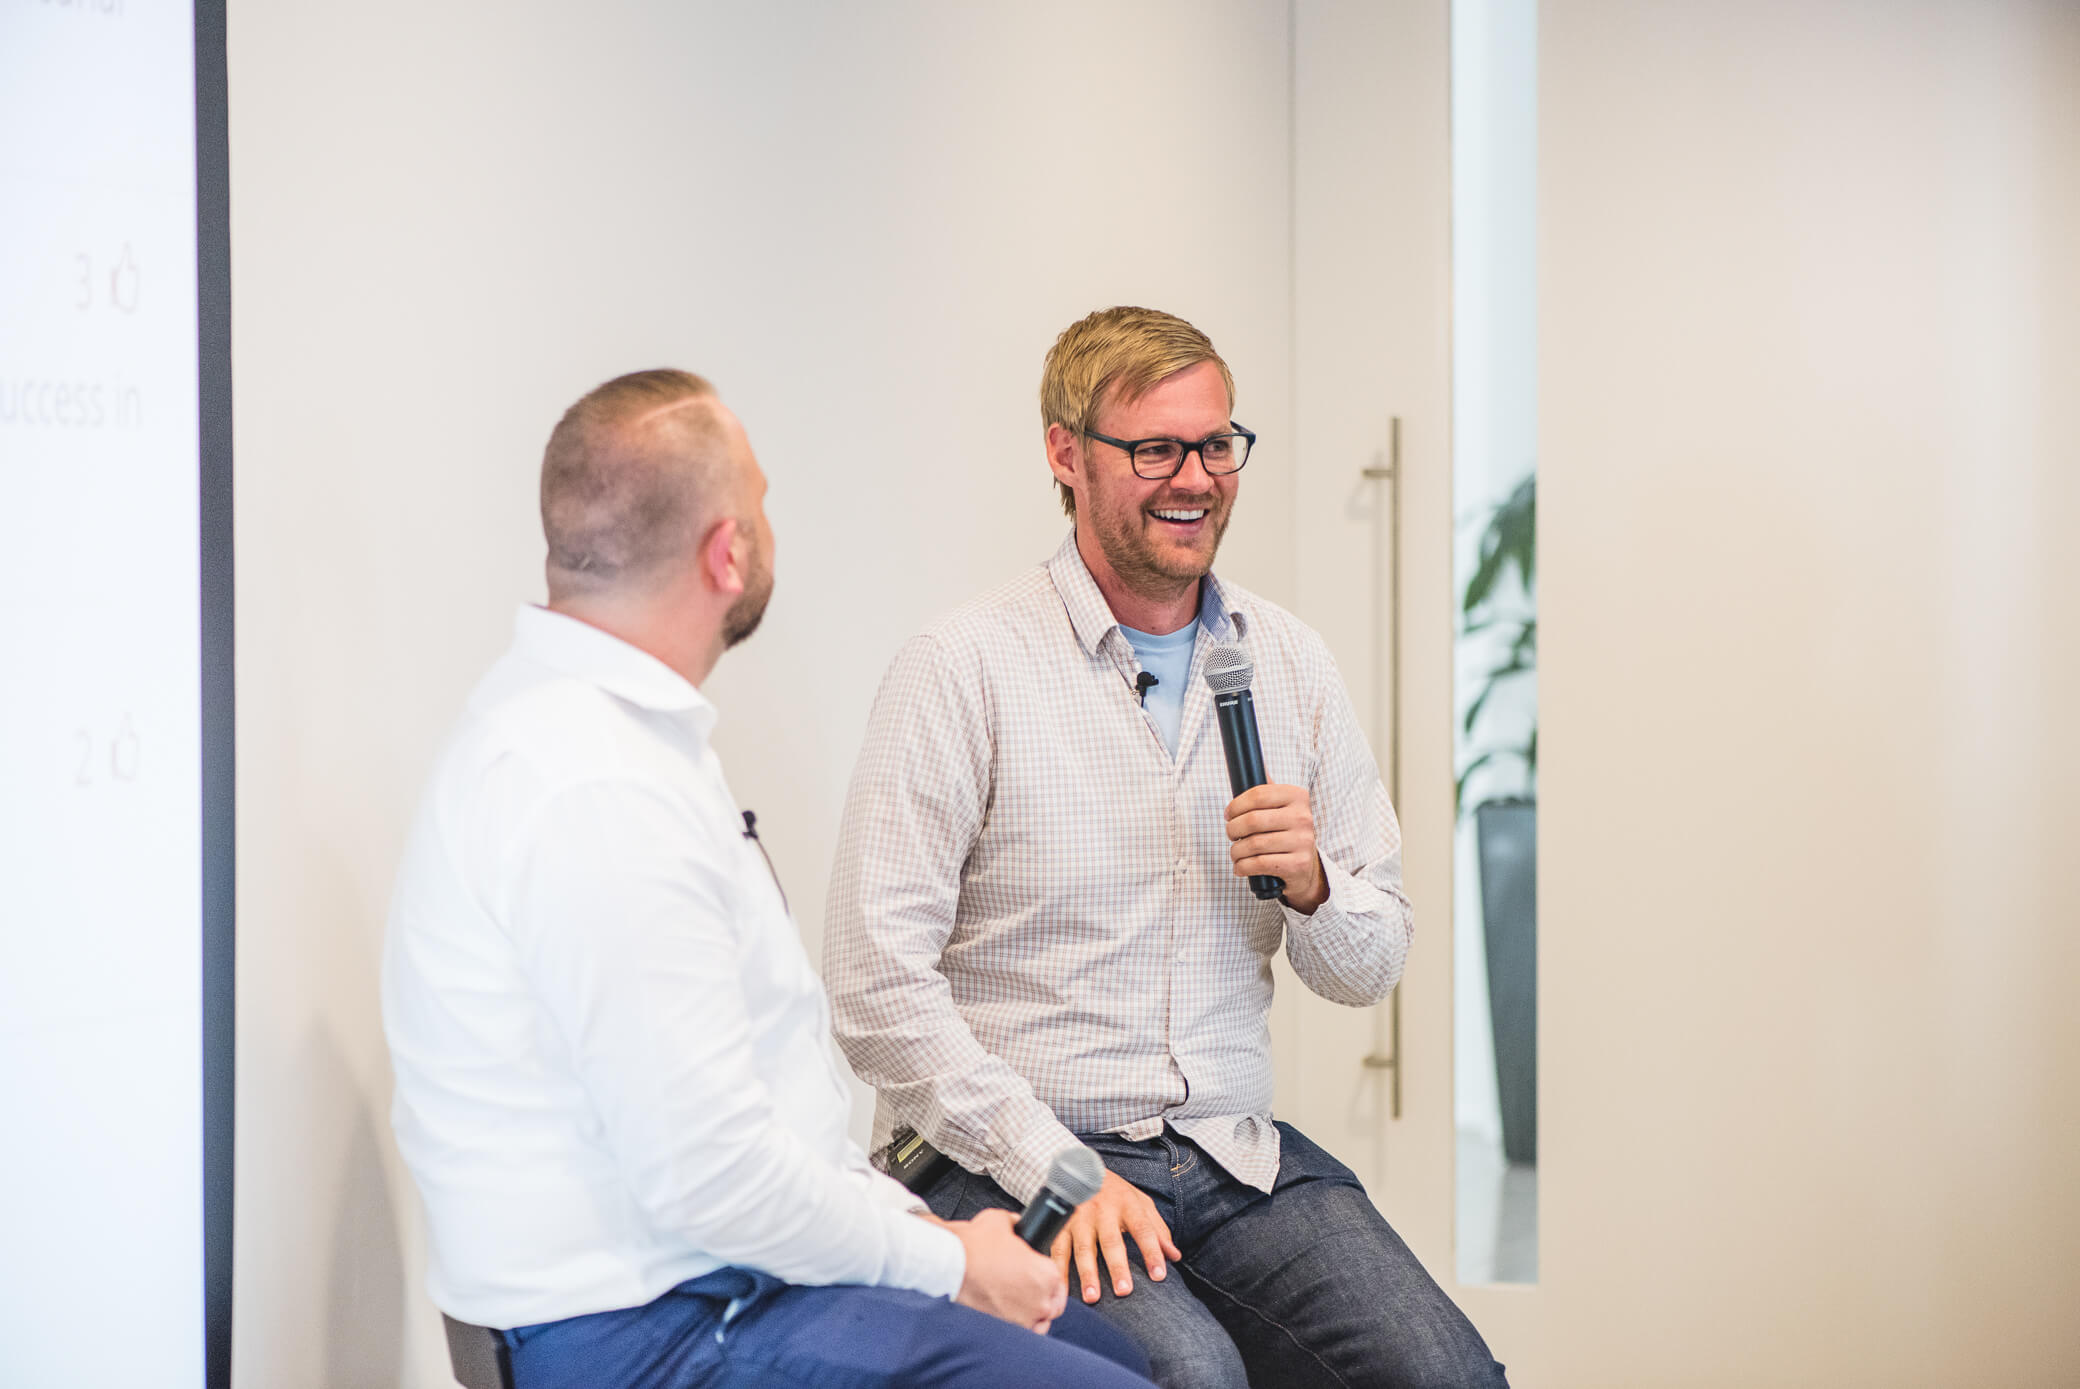 Andrew Hyde (right) speaking to Chris Joannou (left) at Startup Grind Melbourne